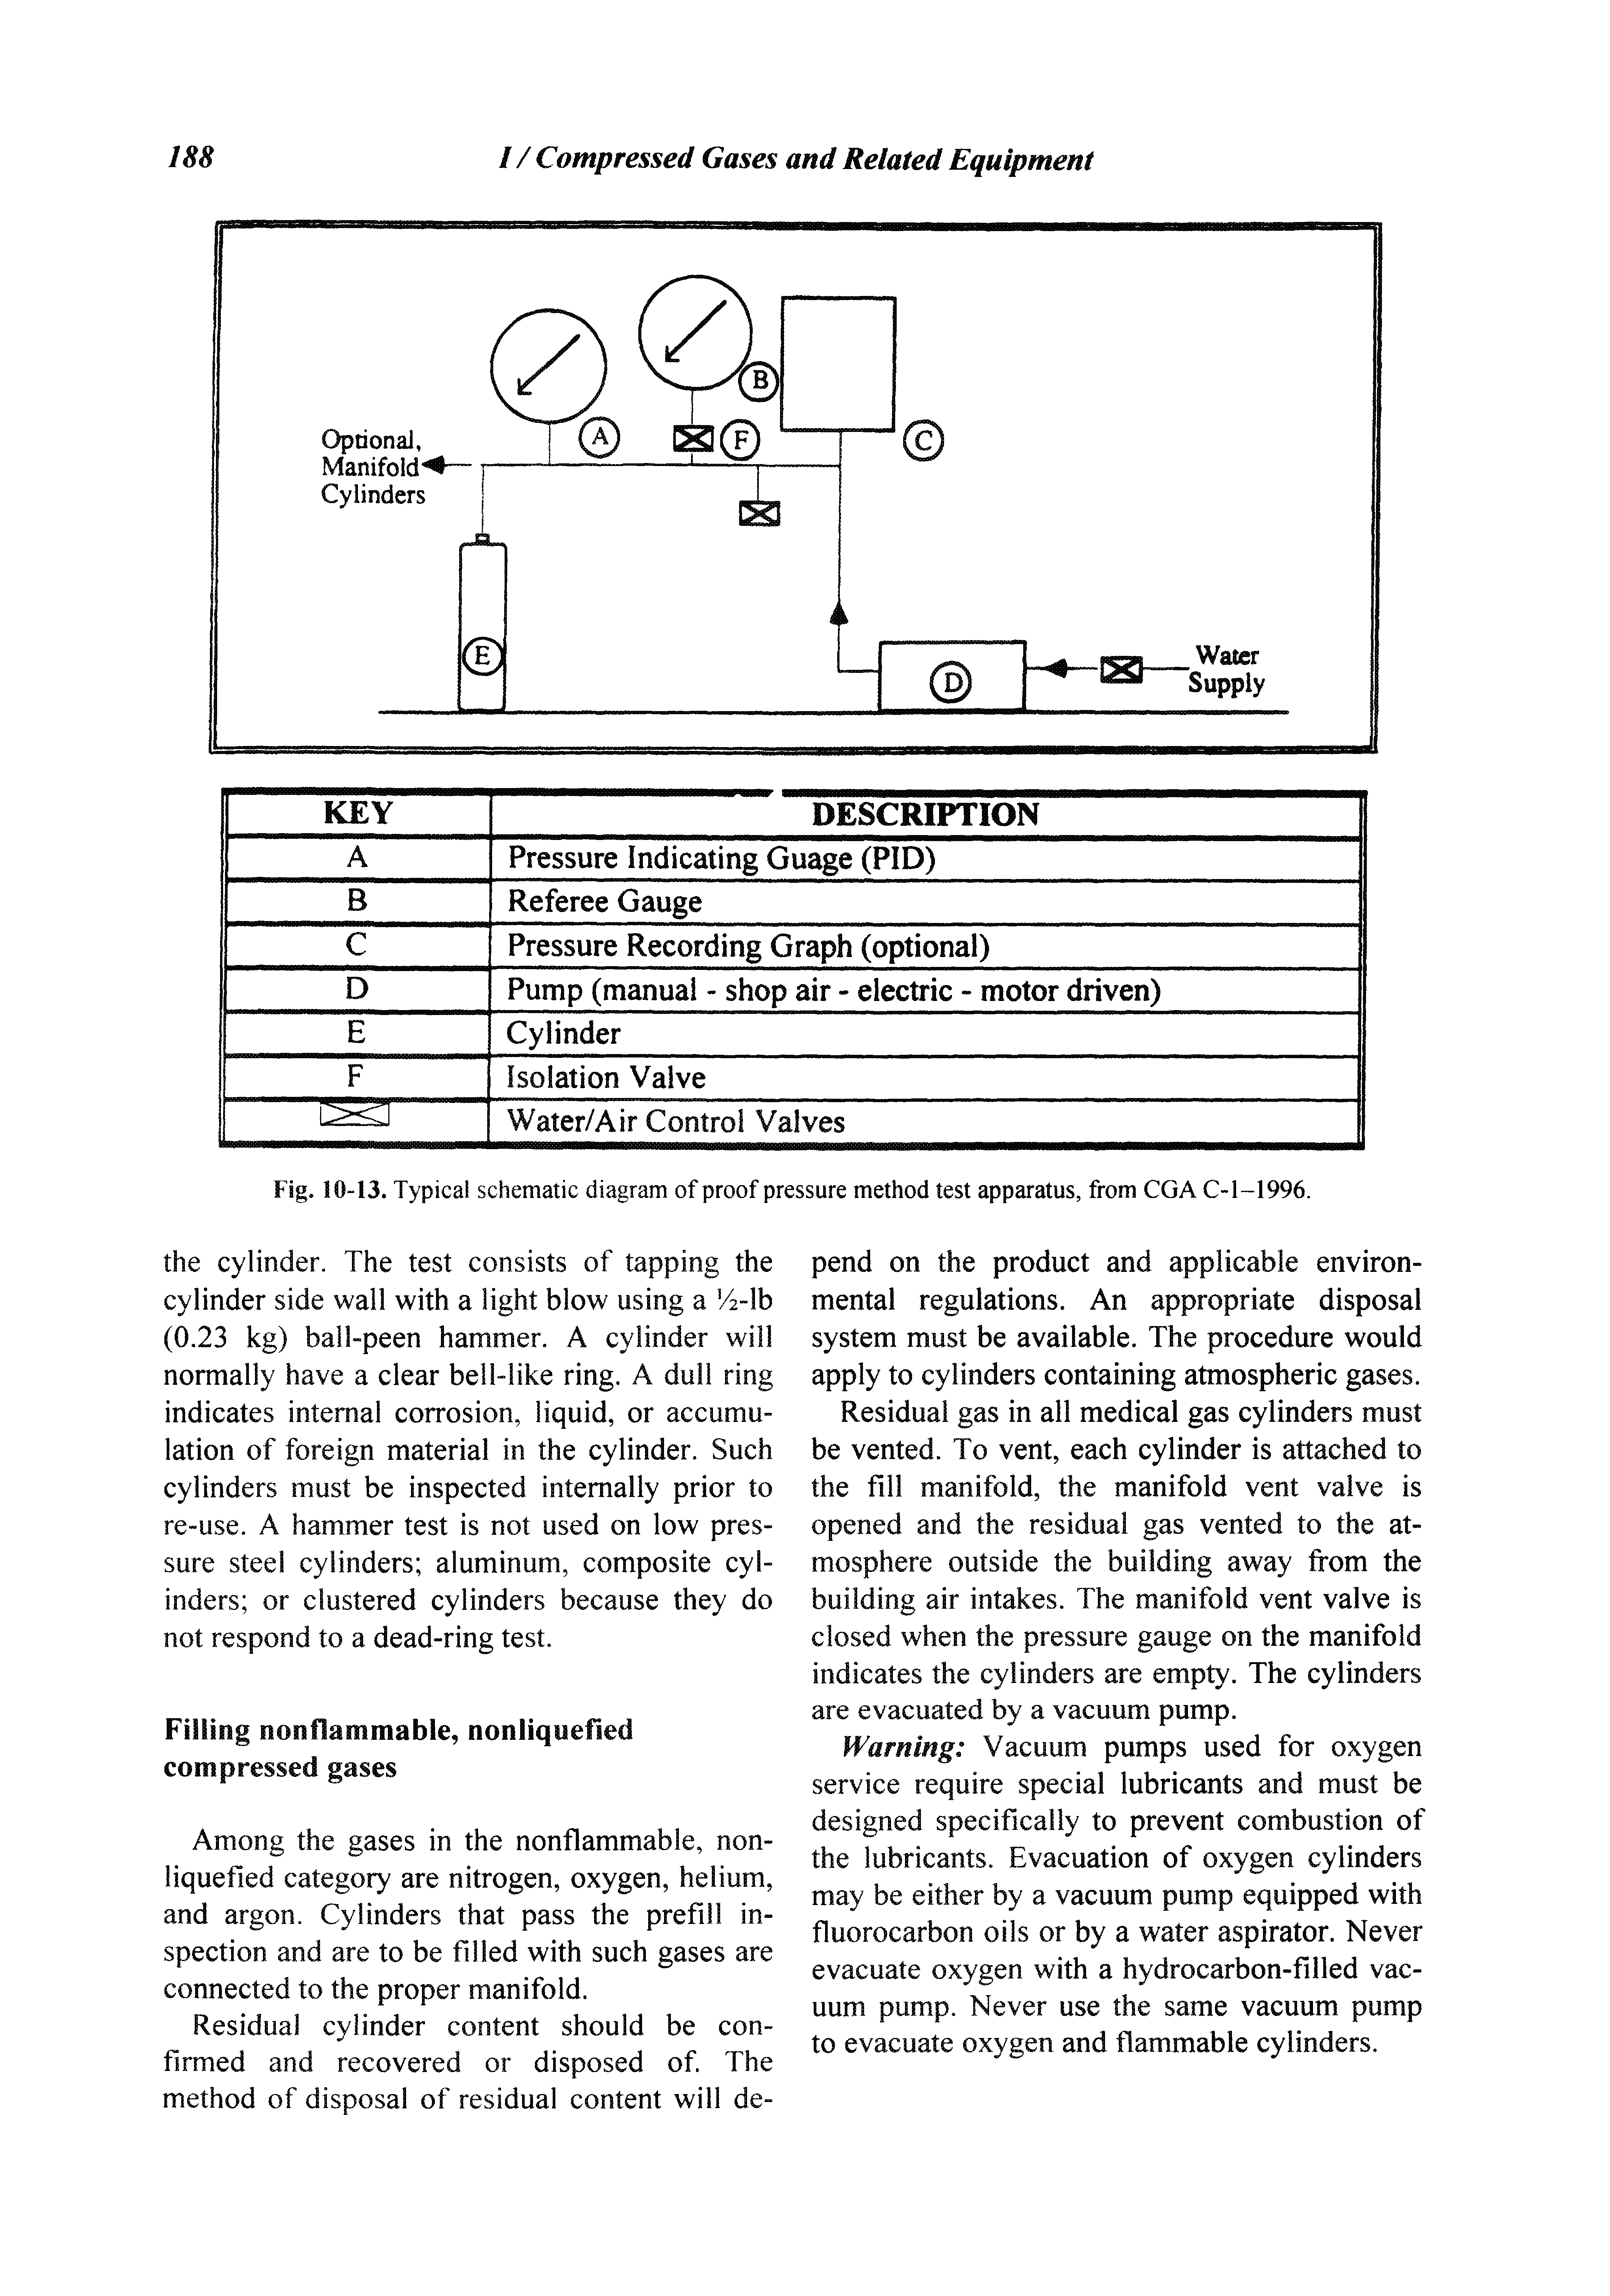 Fig. 10-13. Typical schematic diagram of proof pressure method test apparatus, from CGA C-1-1996.